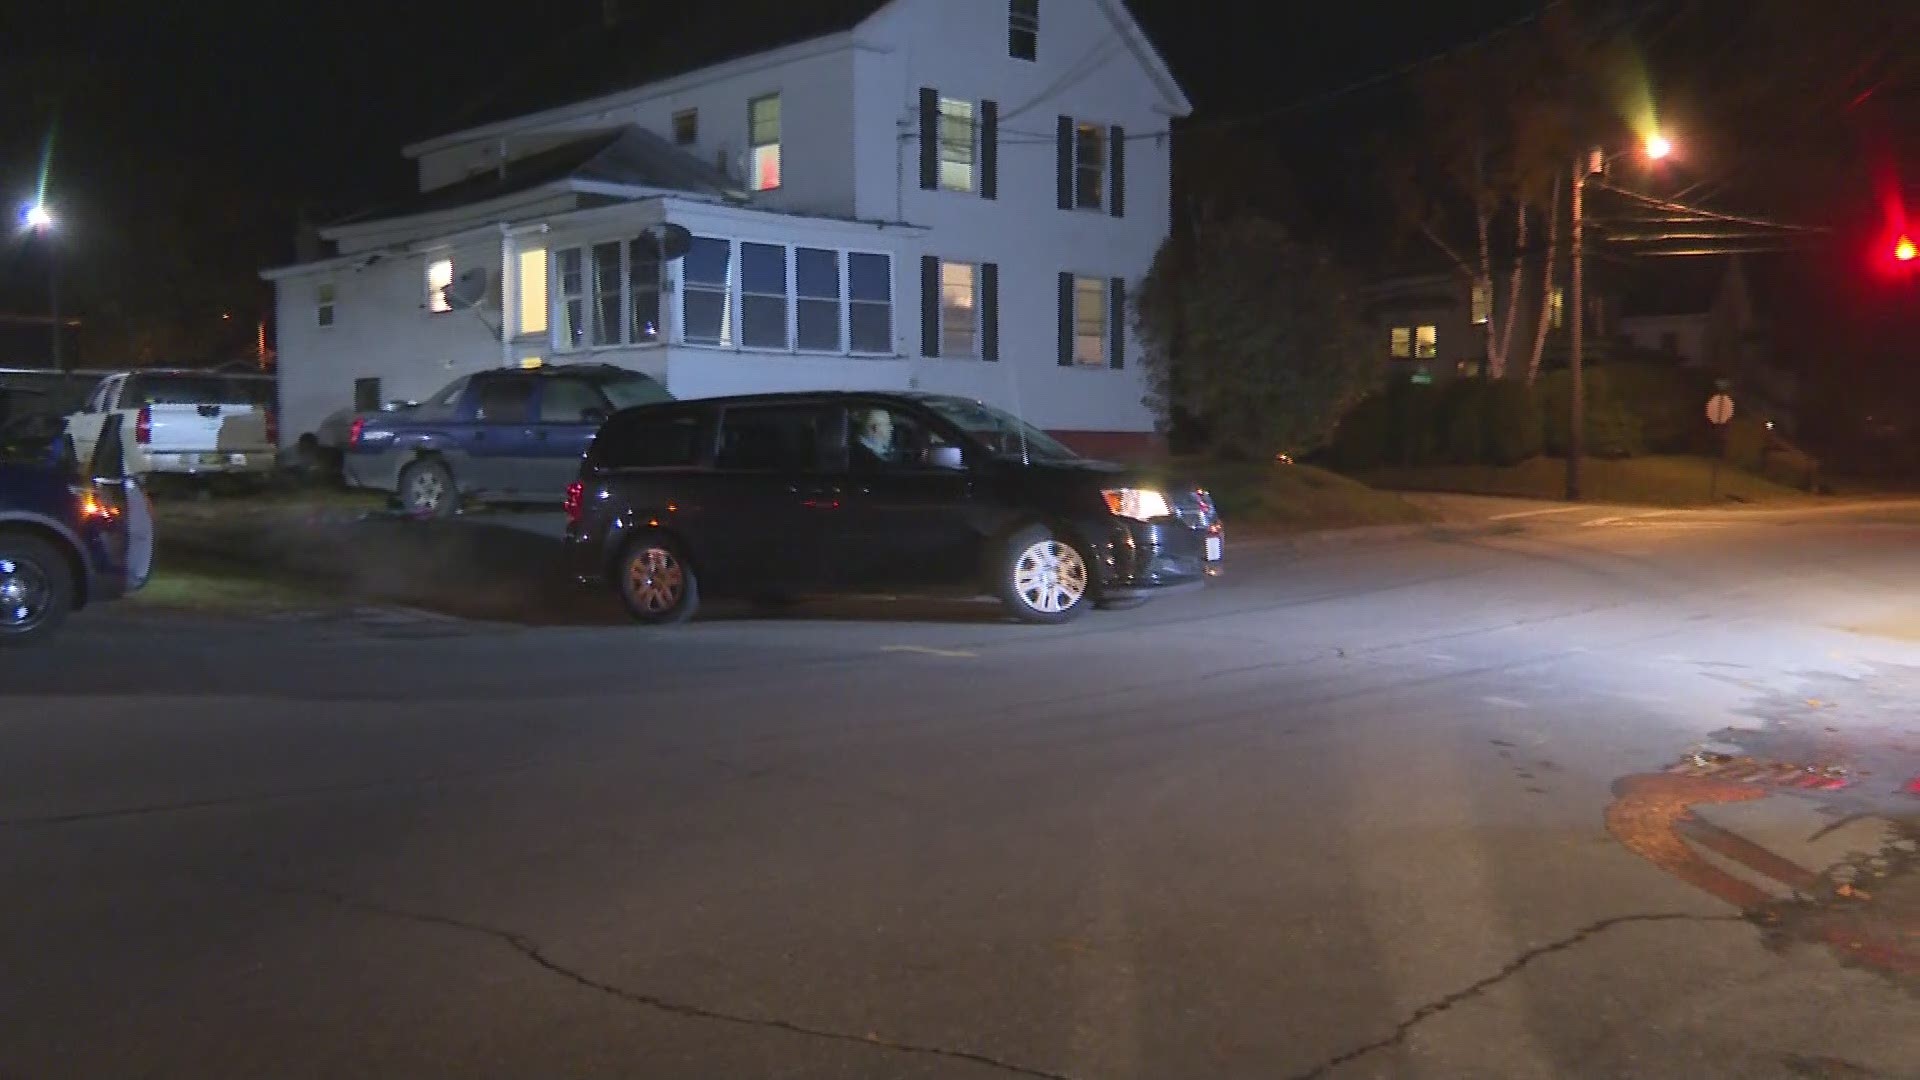 Officials say a body was discovered at the Waterville missing woman's home Wednesday evening